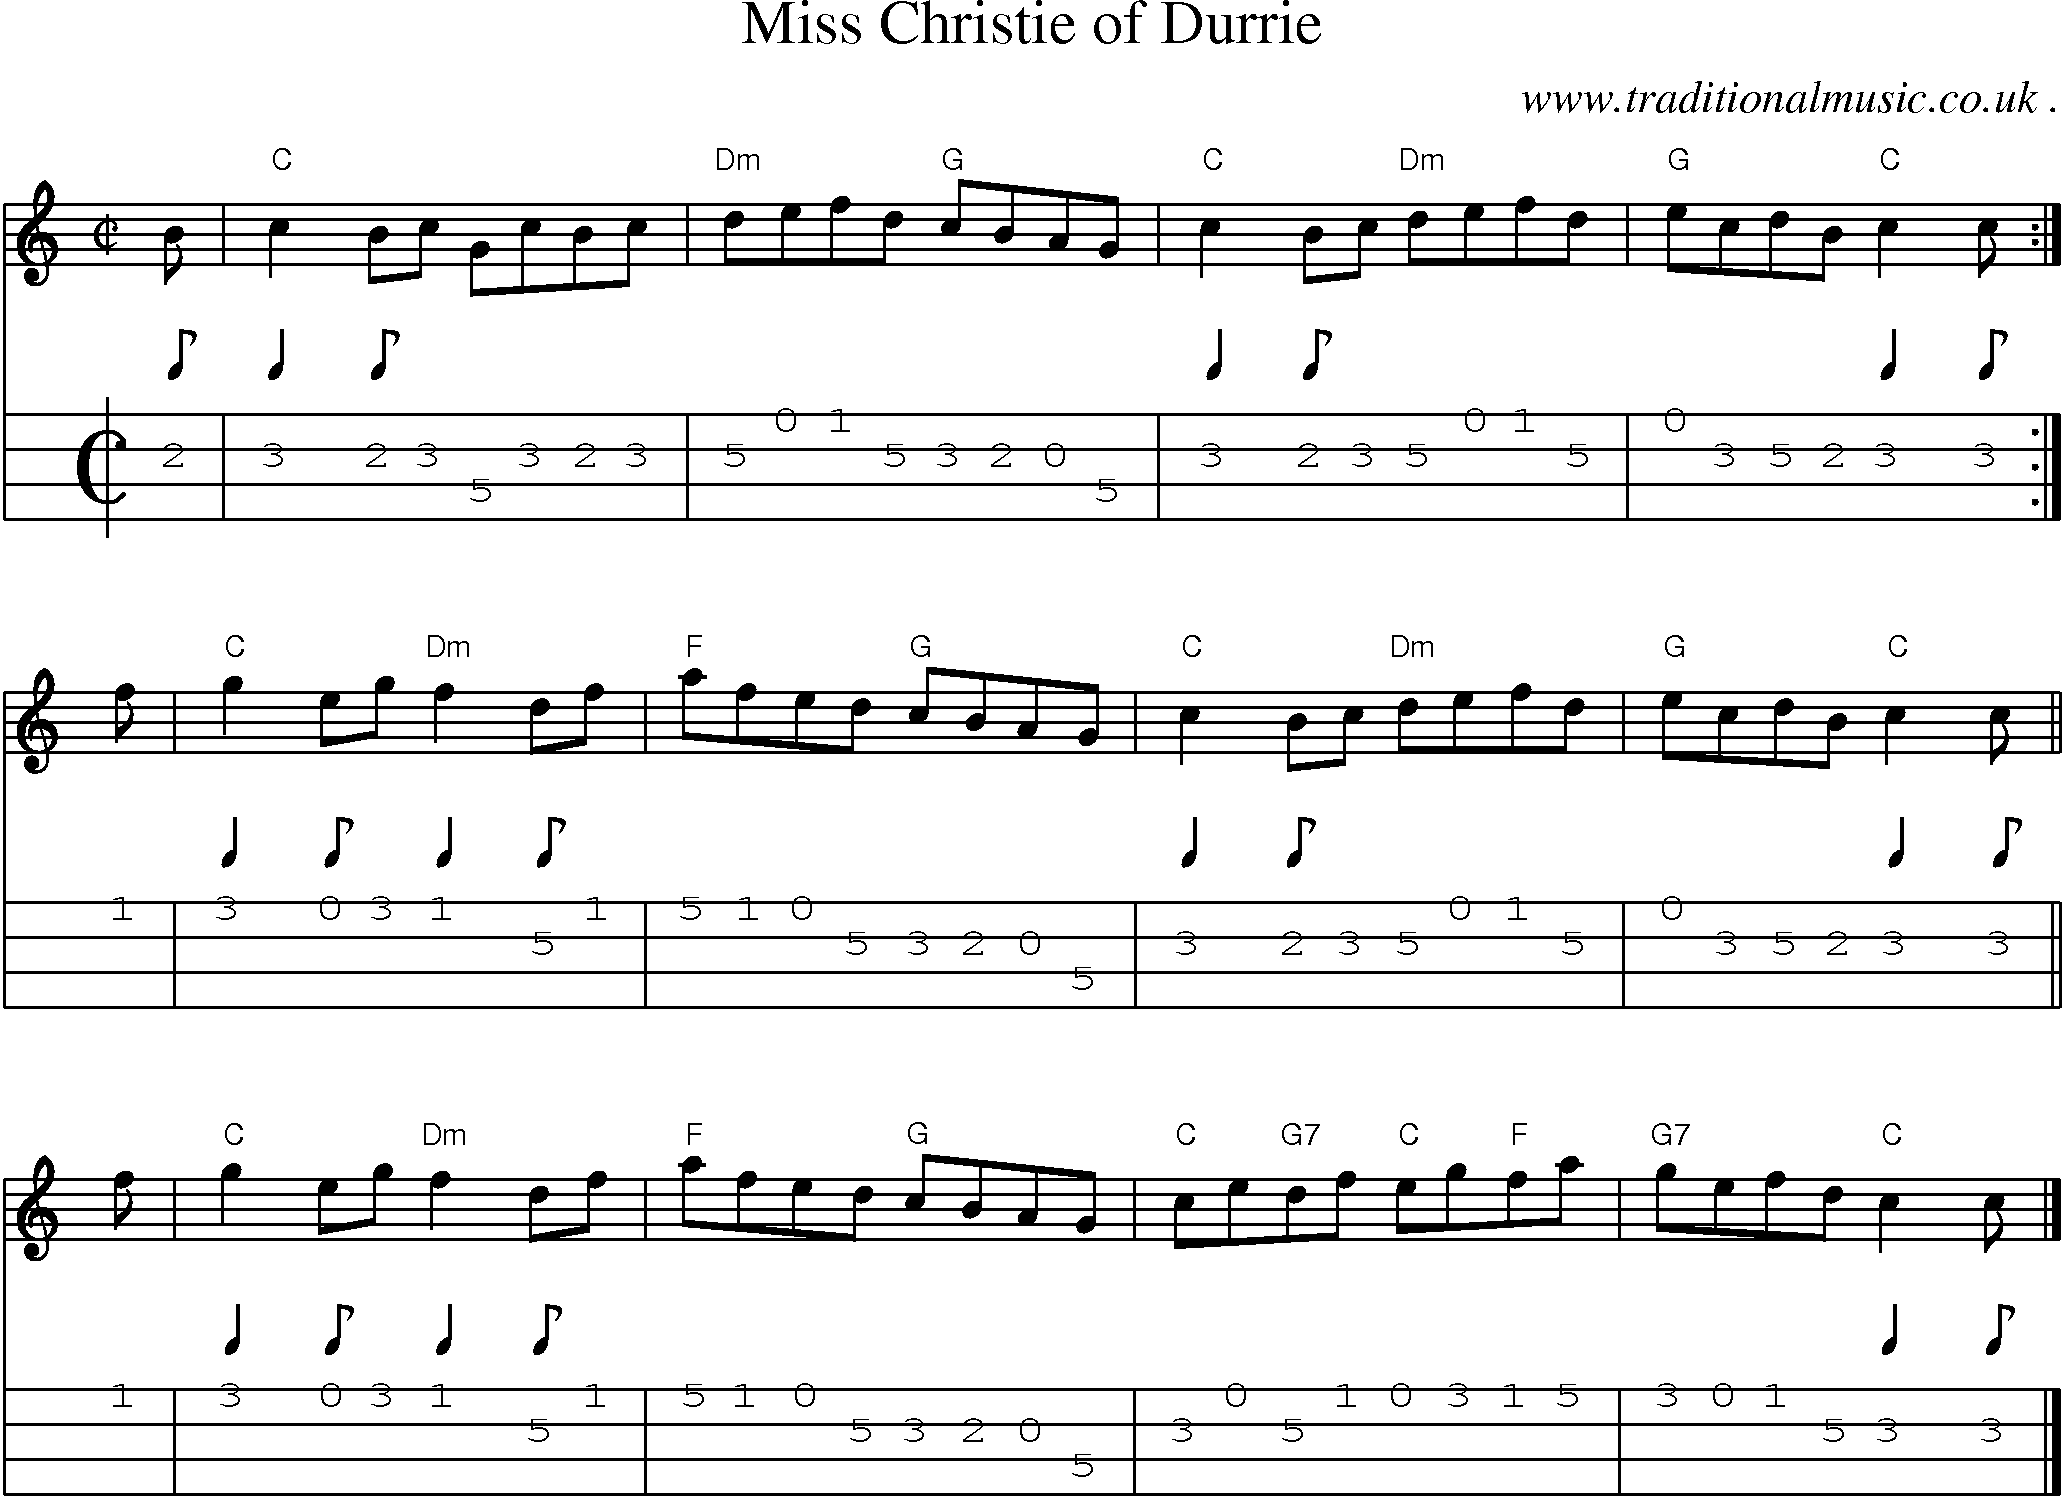 Sheet-music  score, Chords and Mandolin Tabs for Miss Christie Of Durrie